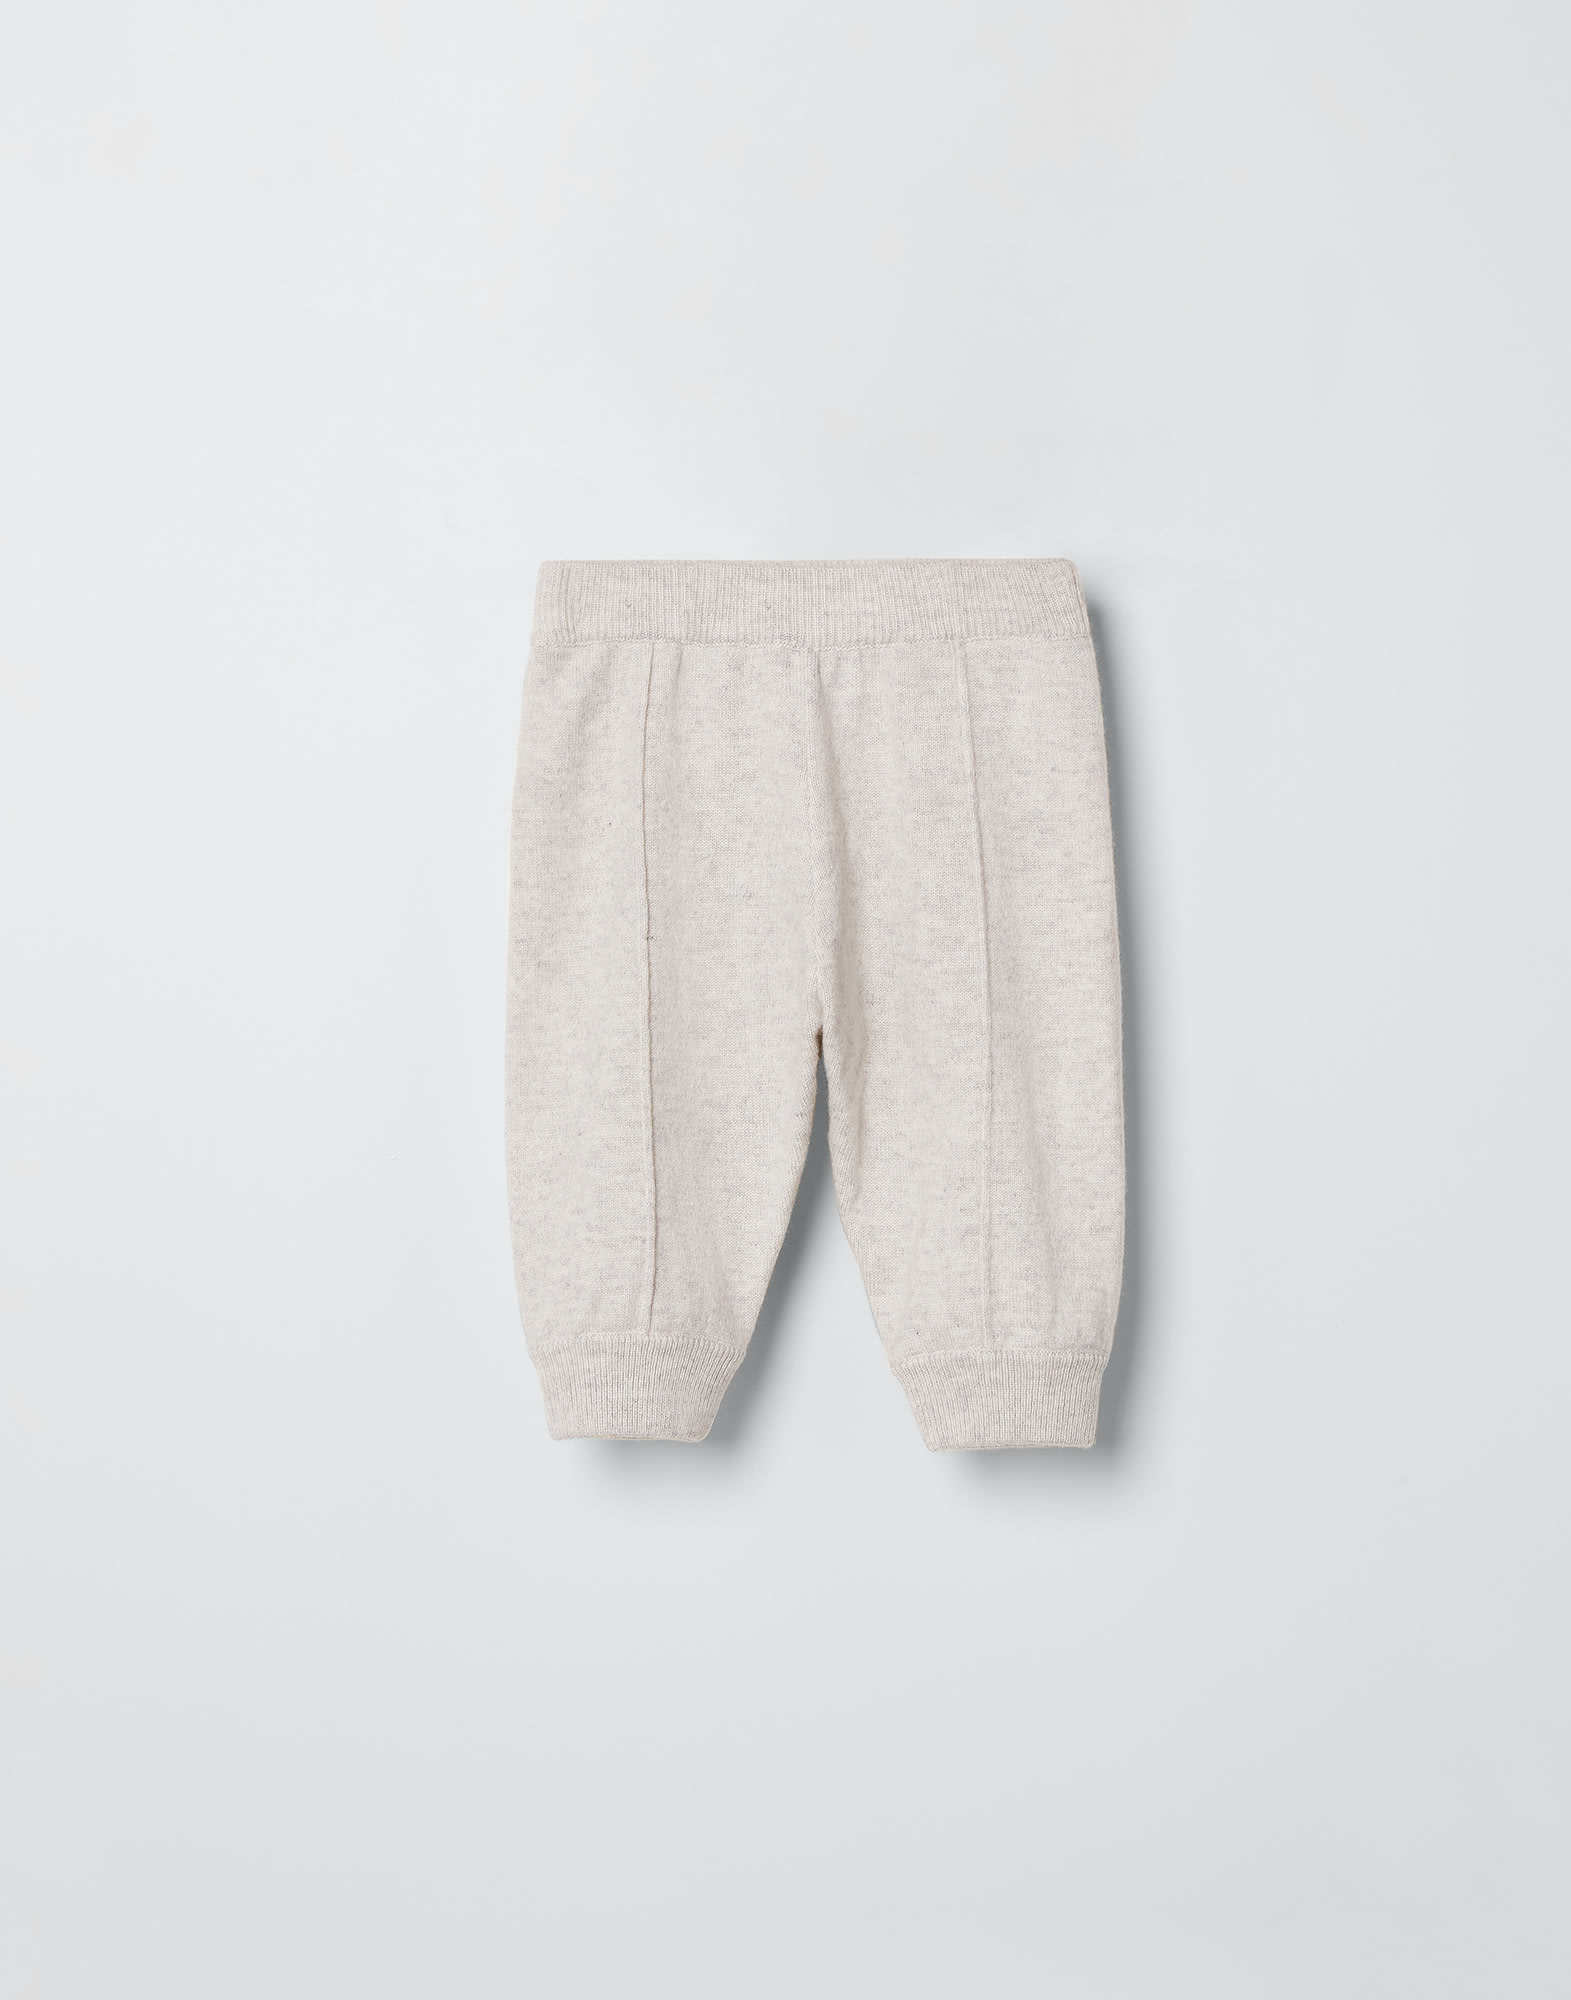 Cashmere knit baby trousers